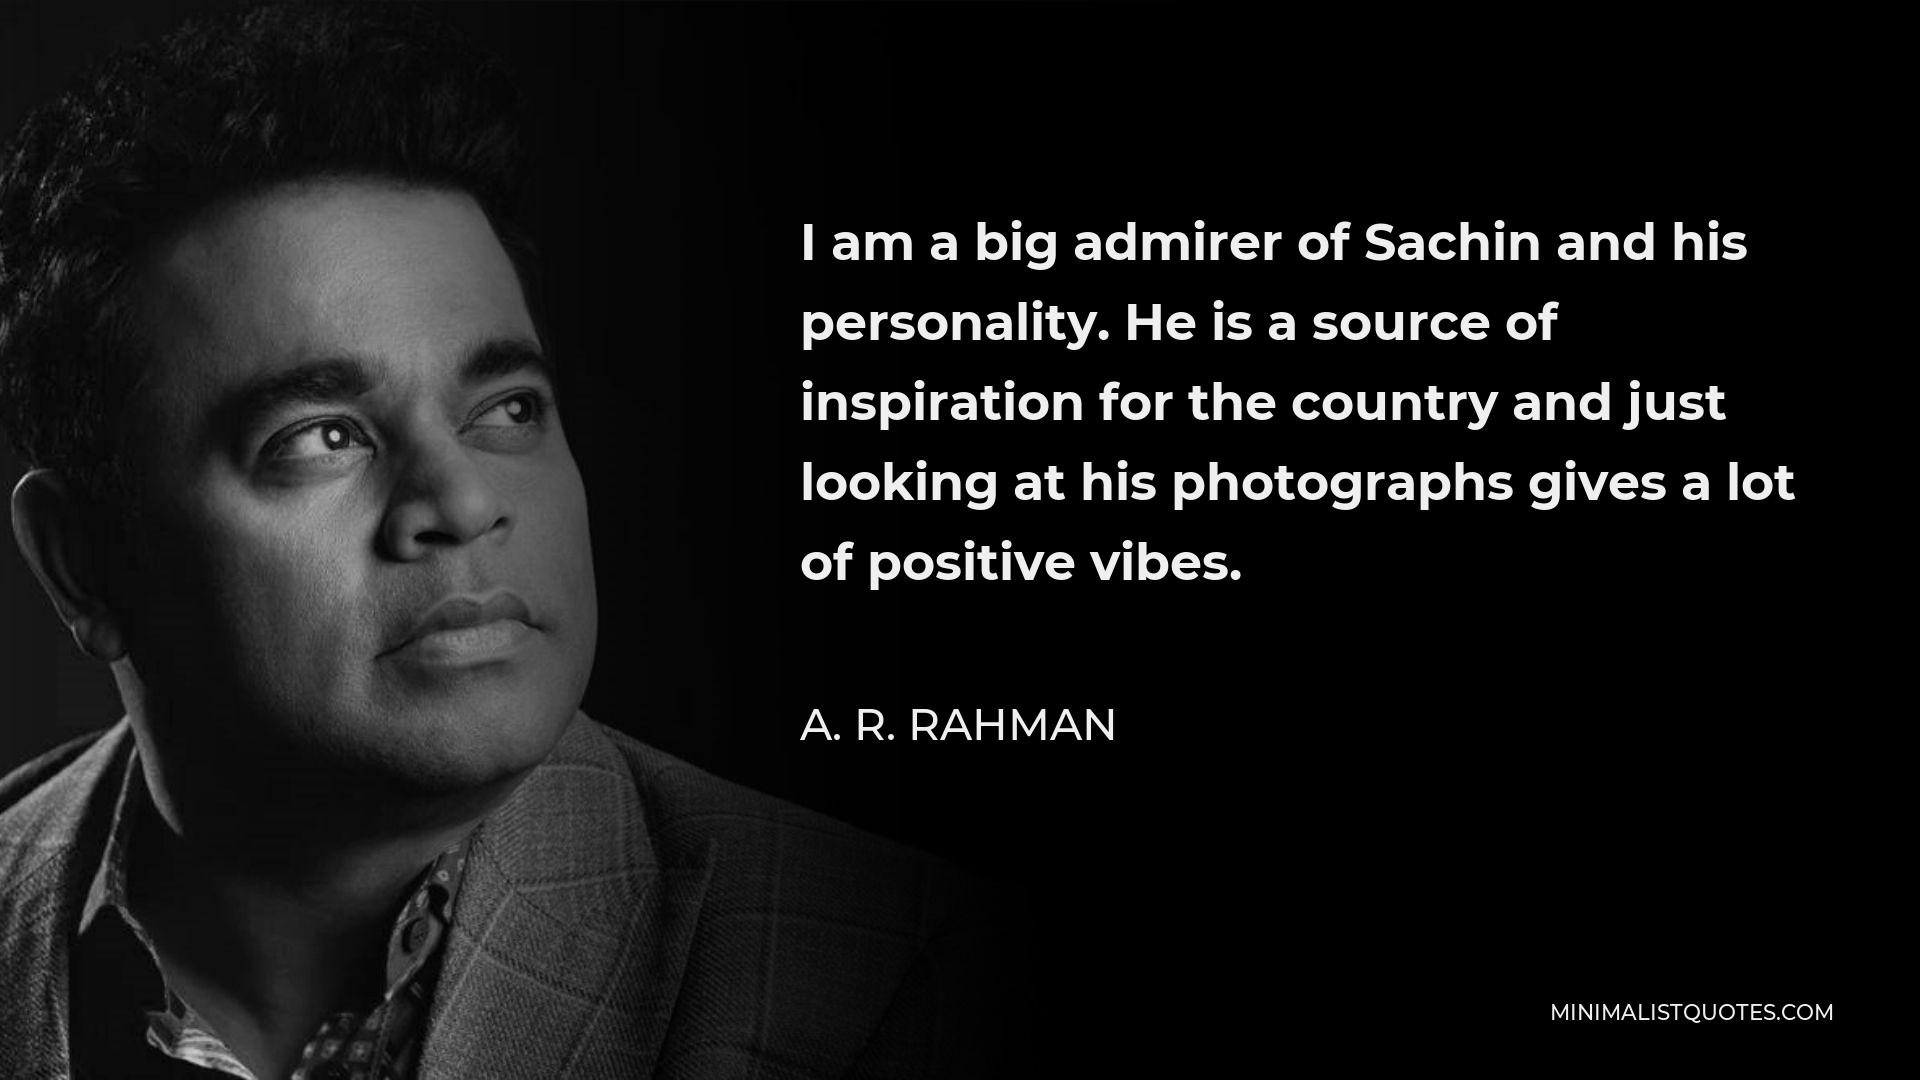 A. R. Rahman Quote - I am a big admirer of Sachin and his personality. He is a source of inspiration for the country and just looking at his photographs gives a lot of positive vibes.